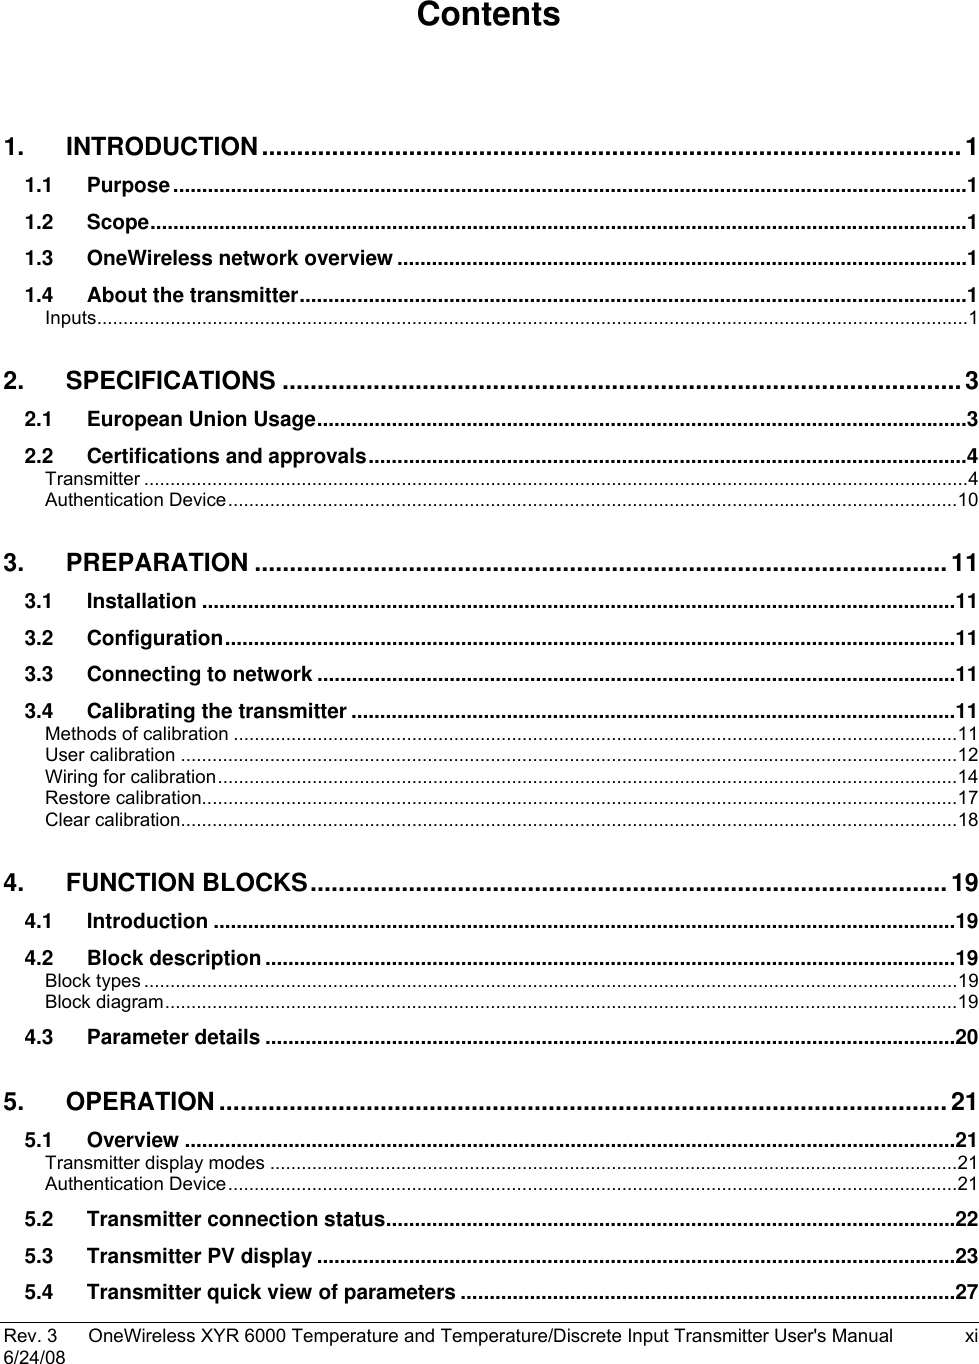  Rev. 3  OneWireless XYR 6000 Temperature and Temperature/Discrete Input Transmitter User&apos;s Manual  xi 6/24/08    Contents  1. INTRODUCTION....................................................................................................1 1.1 Purpose..........................................................................................................................................1 1.2 Scope..............................................................................................................................................1 1.3 OneWireless network overview ...................................................................................................1 1.4 About the transmitter....................................................................................................................1 Inputs......................................................................................................................................................................1 2. SPECIFICATIONS .................................................................................................3 2.1 European Union Usage.................................................................................................................3 2.2 Certifications and approvals........................................................................................................4 Transmitter .............................................................................................................................................................4 Authentication Device...........................................................................................................................................10 3. PREPARATION ...................................................................................................11 3.1 Installation ...................................................................................................................................11 3.2 Configuration...............................................................................................................................11 3.3 Connecting to network ...............................................................................................................11 3.4 Calibrating the transmitter .........................................................................................................11 Methods of calibration ..........................................................................................................................................11 User calibration ....................................................................................................................................................12 Wiring for calibration.............................................................................................................................................14 Restore calibration................................................................................................................................................17 Clear calibration....................................................................................................................................................18 4. FUNCTION BLOCKS........................................................................................... 19 4.1 Introduction .................................................................................................................................19 4.2 Block description ........................................................................................................................19 Block types ...........................................................................................................................................................19 Block diagram.......................................................................................................................................................19 4.3 Parameter details ........................................................................................................................20 5. OPERATION ........................................................................................................21 5.1 Overview ......................................................................................................................................21 Transmitter display modes ...................................................................................................................................21 Authentication Device...........................................................................................................................................21 5.2 Transmitter connection status...................................................................................................22 5.3 Transmitter PV display ...............................................................................................................23 5.4 Transmitter quick view of parameters ......................................................................................27 